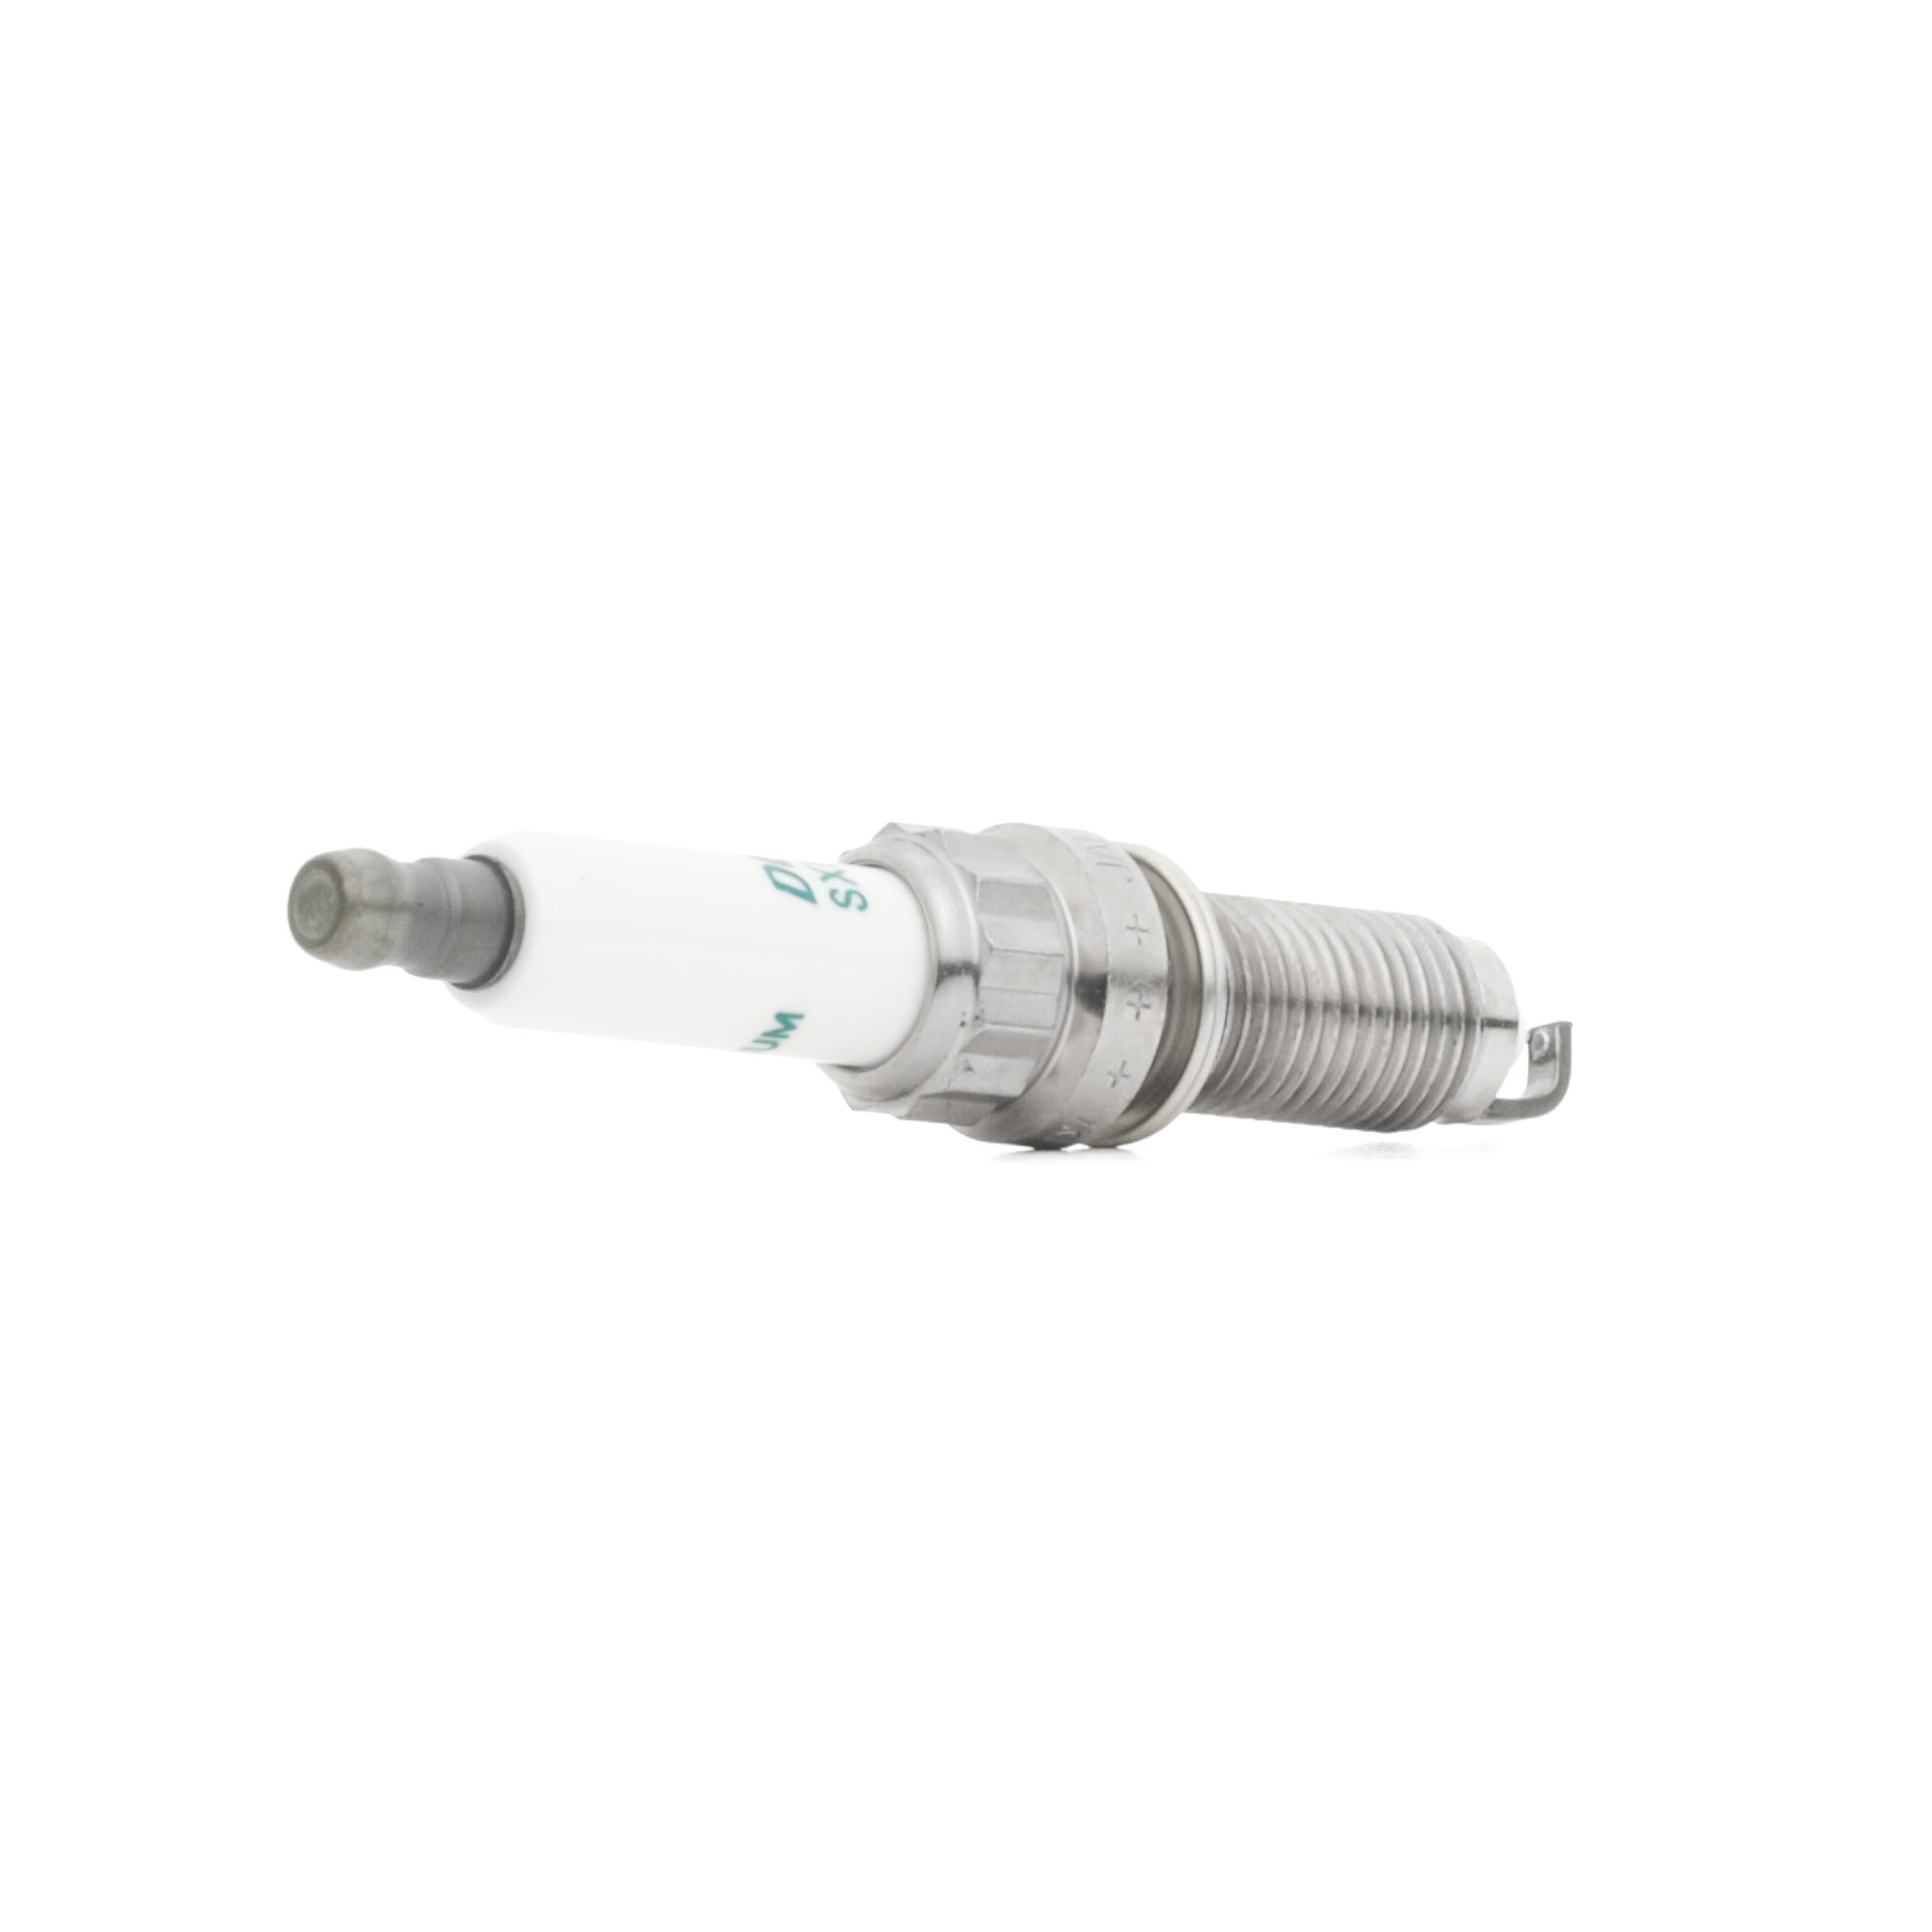 X5 (G05) Ignition and preheating parts - Spark plug DENSO SXB24HCF-D7